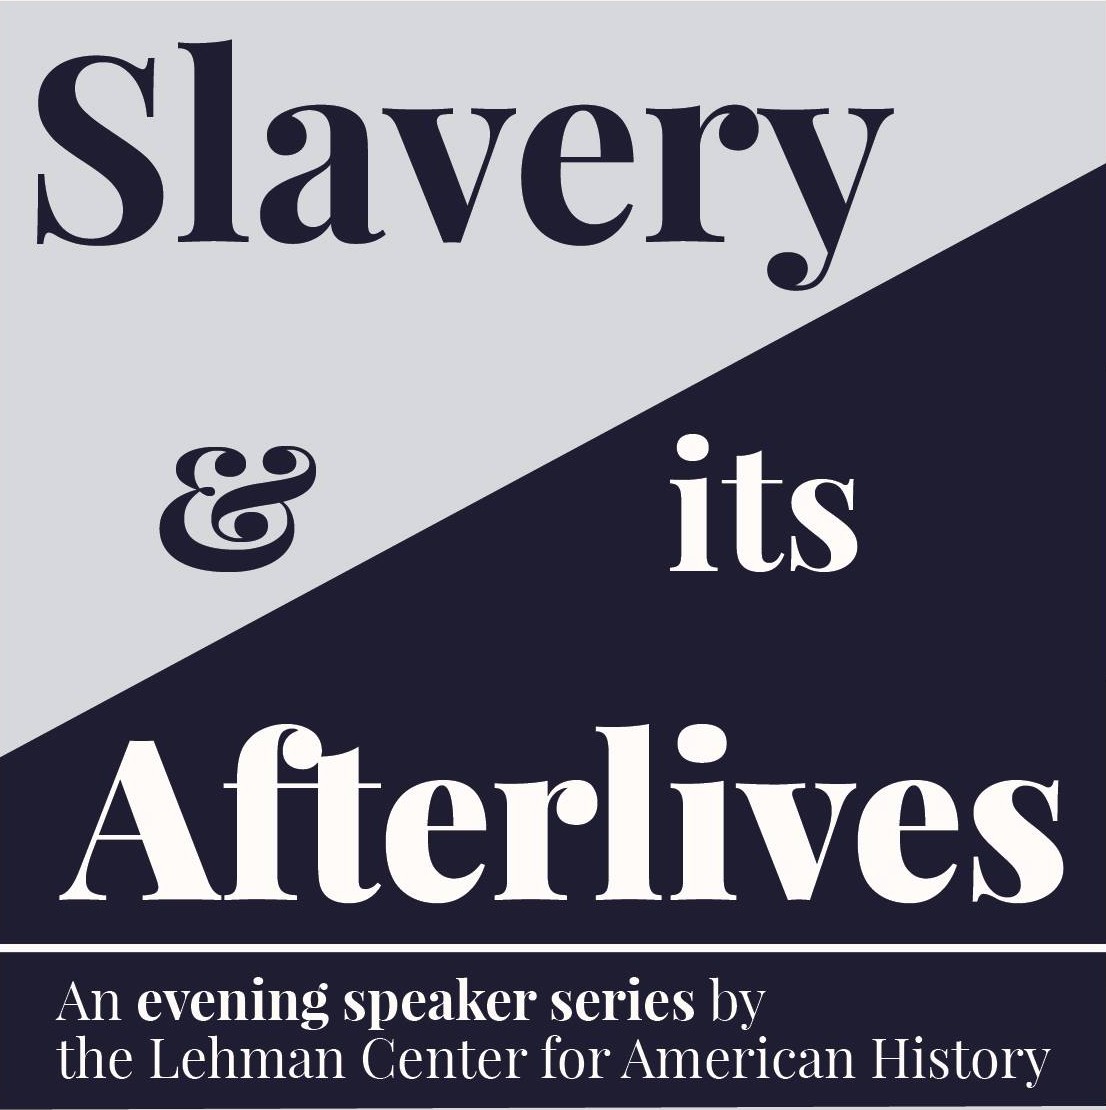 "Slavery and its Afterlives" Evening Speaker Series 